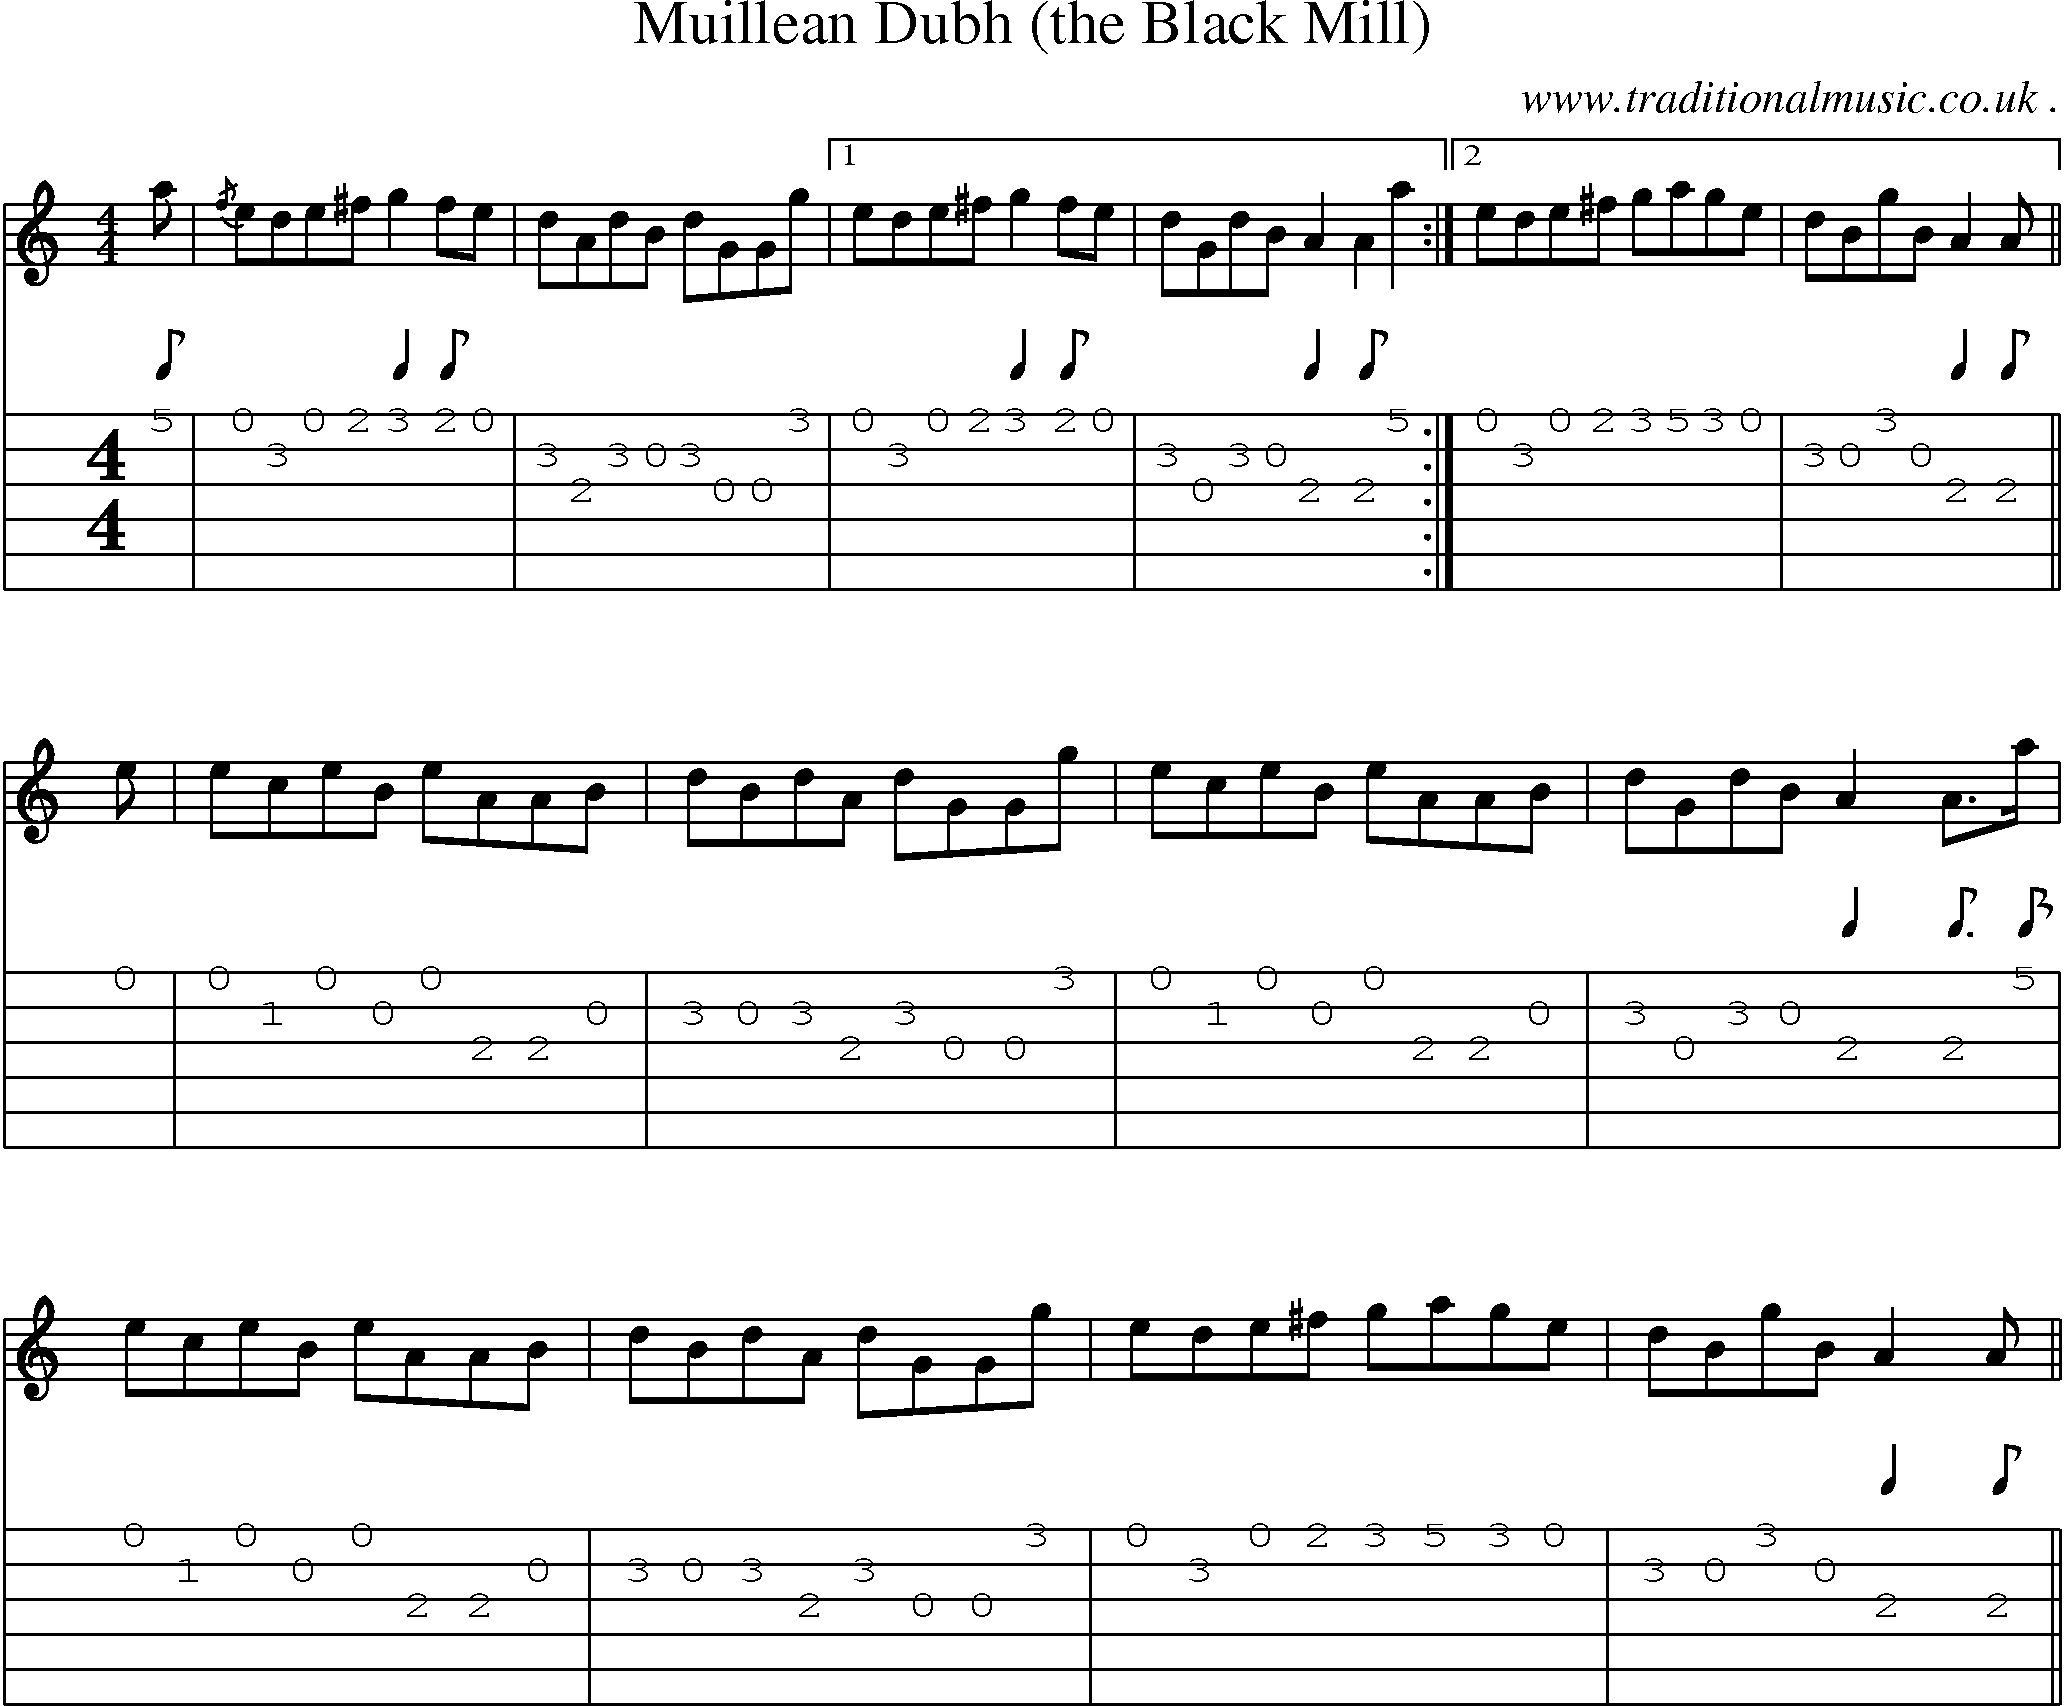 Sheet-music  score, Chords and Guitar Tabs for Muillean Dubh The Black Mill